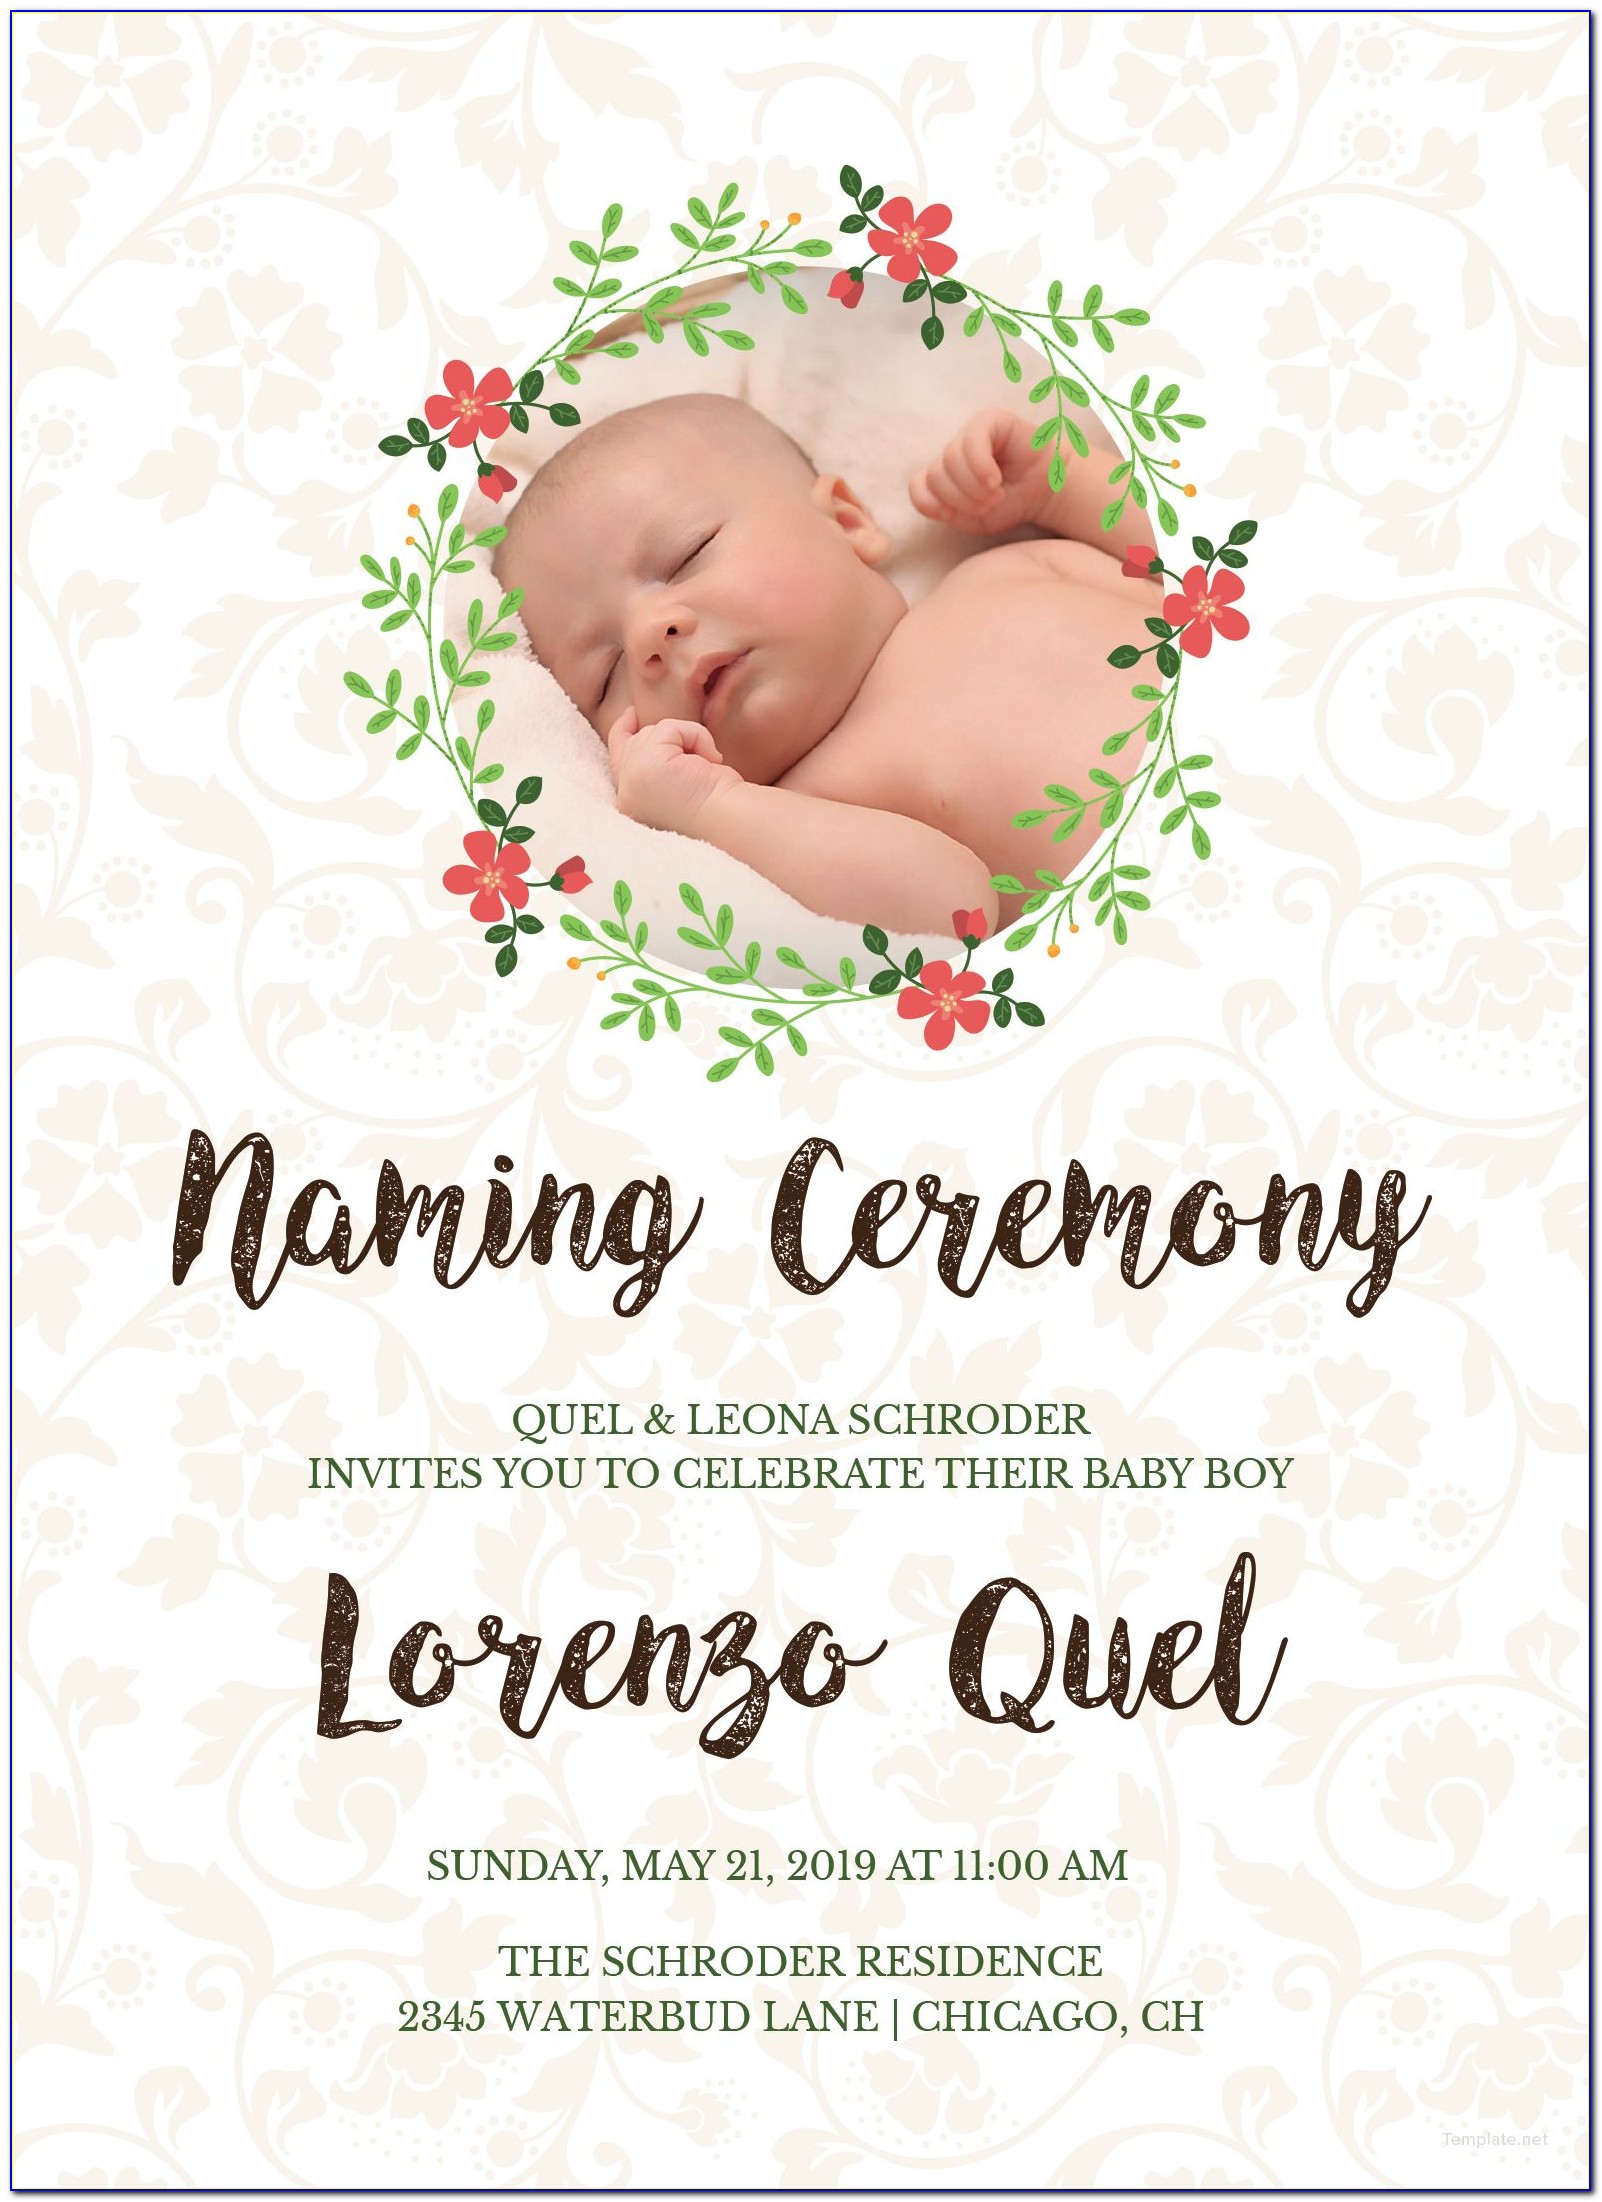 Naming Ceremony Invitation Card For Baby Boy